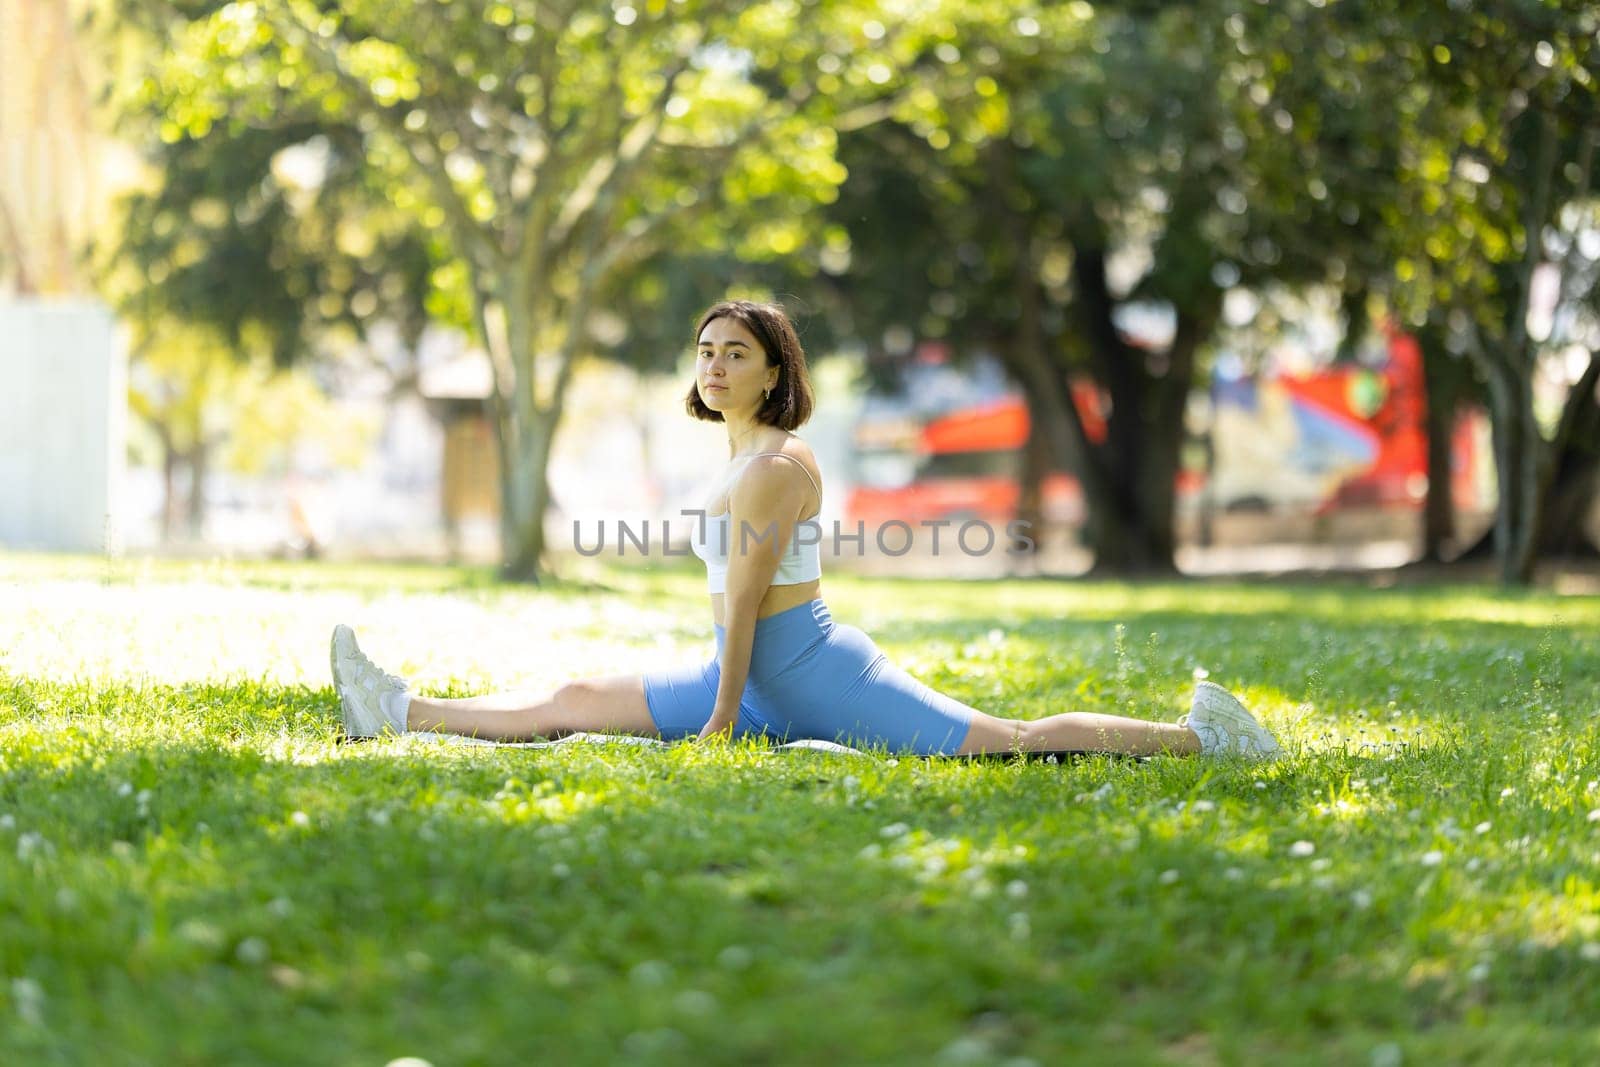 A woman is doing a split on a grassy field. Concept of freedom and relaxation, as the woman is stretching her body in a natural setting